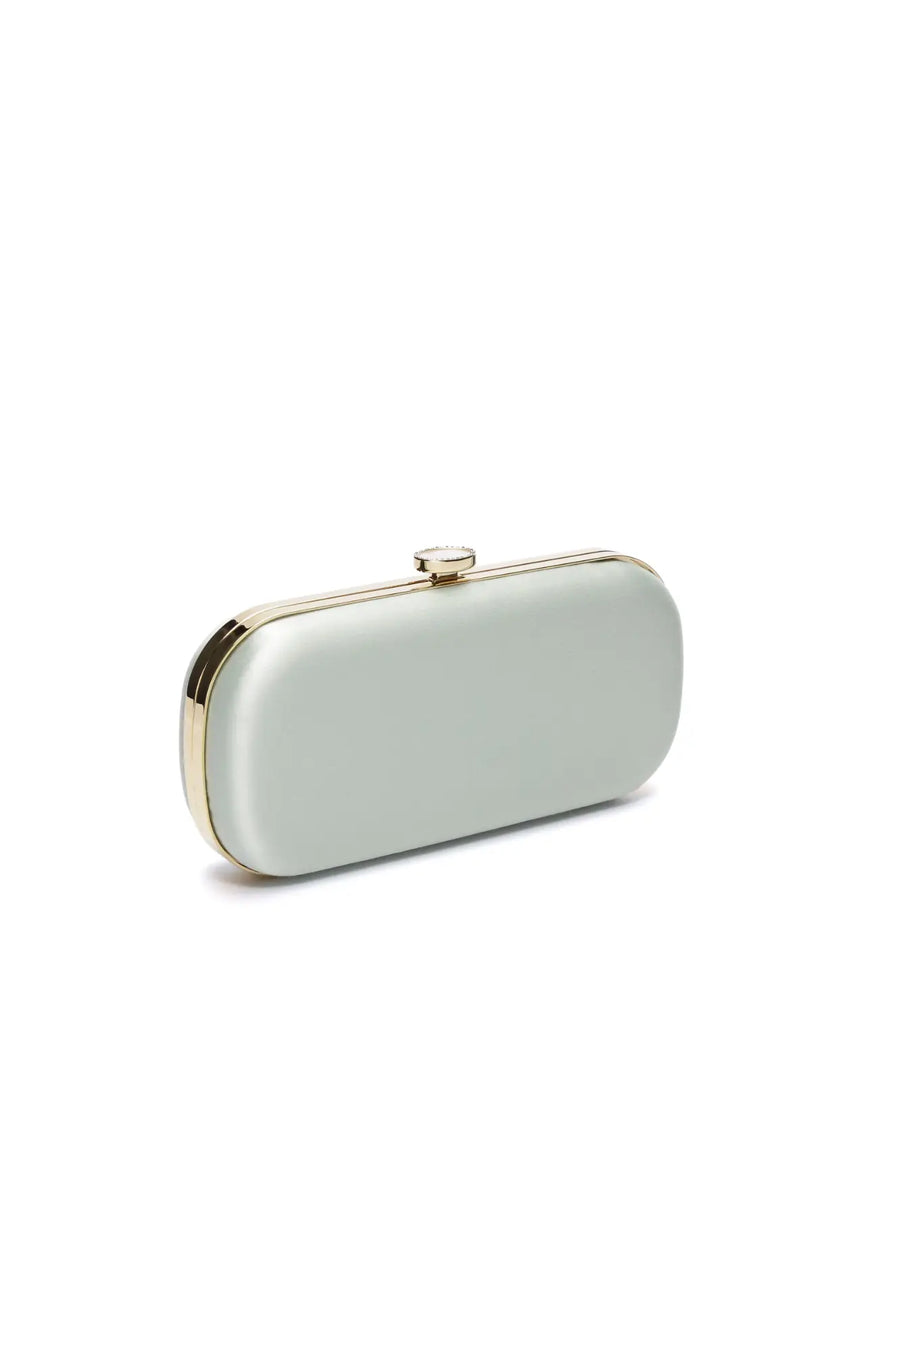 Elegant Sage Green Satin Bella Clutch by The Bella Rosa Collection with gold trim on a white background, perfect as a designer bridal bag.